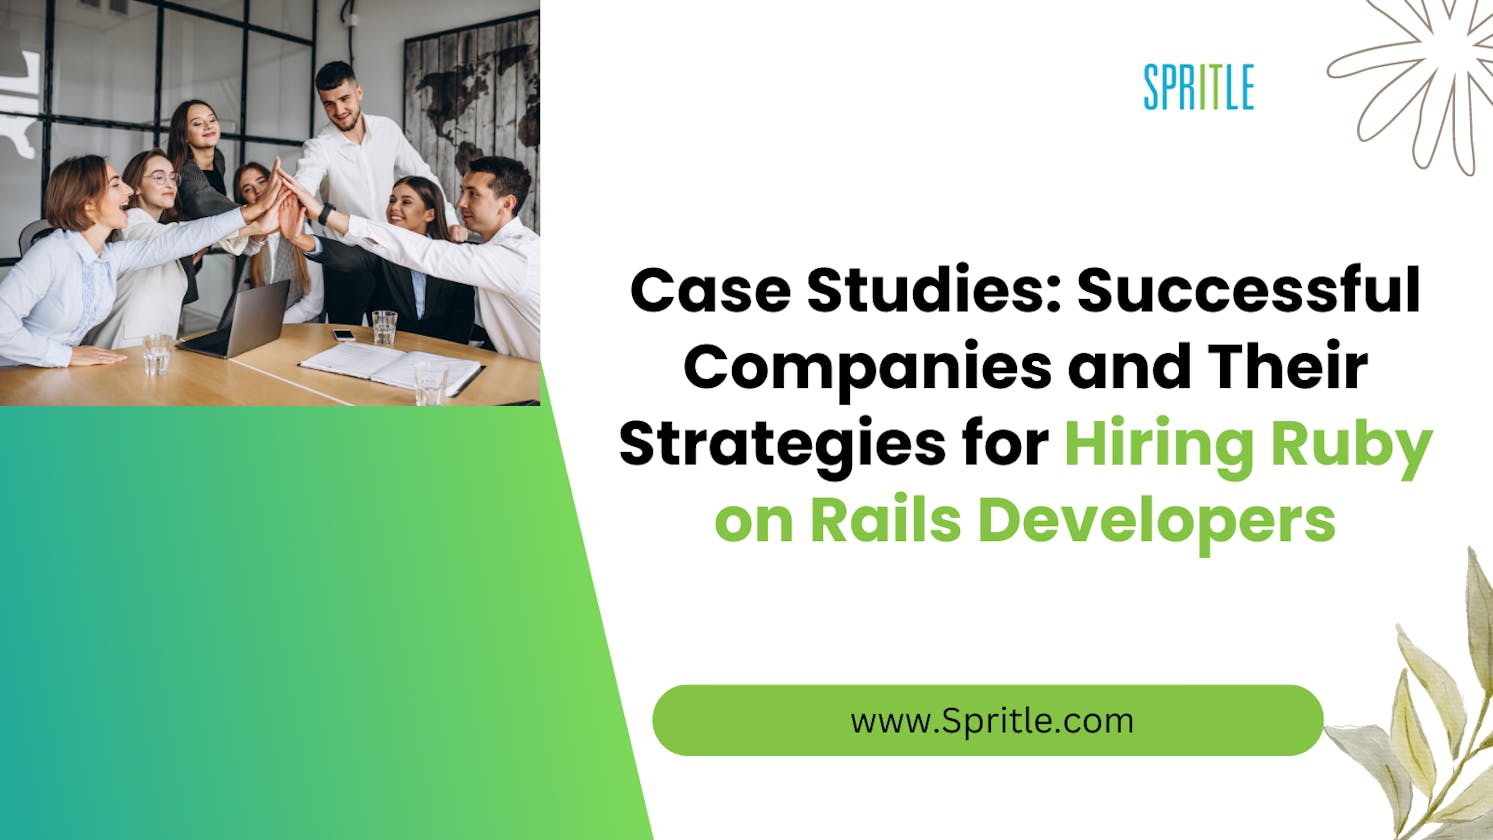 Case Studies: Successful Companies and Their Strategies for Hiring Ruby on Rails Developers